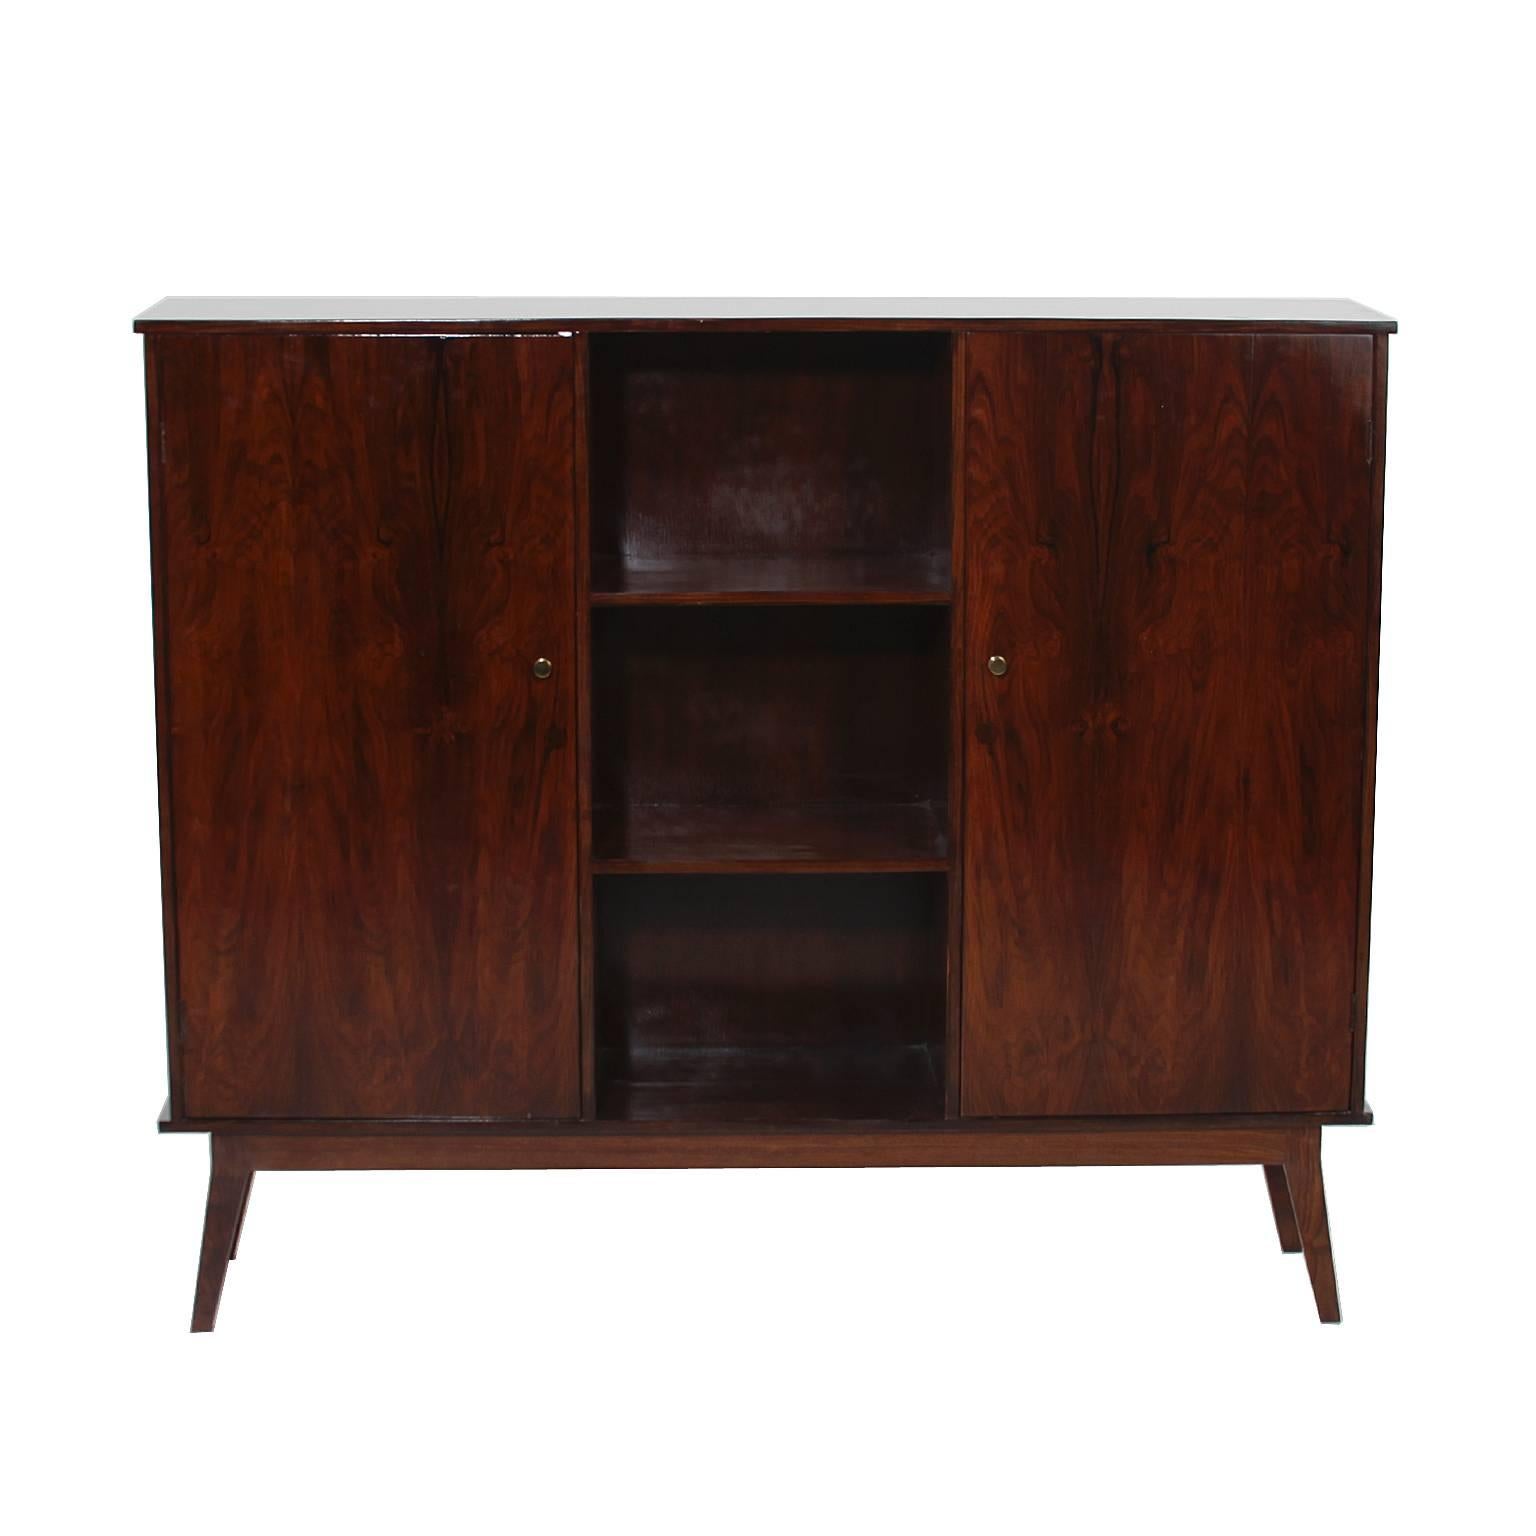 A vintage exotic hardwood cabinet from Brazil featuring several interior shelves and small brass handles.

 